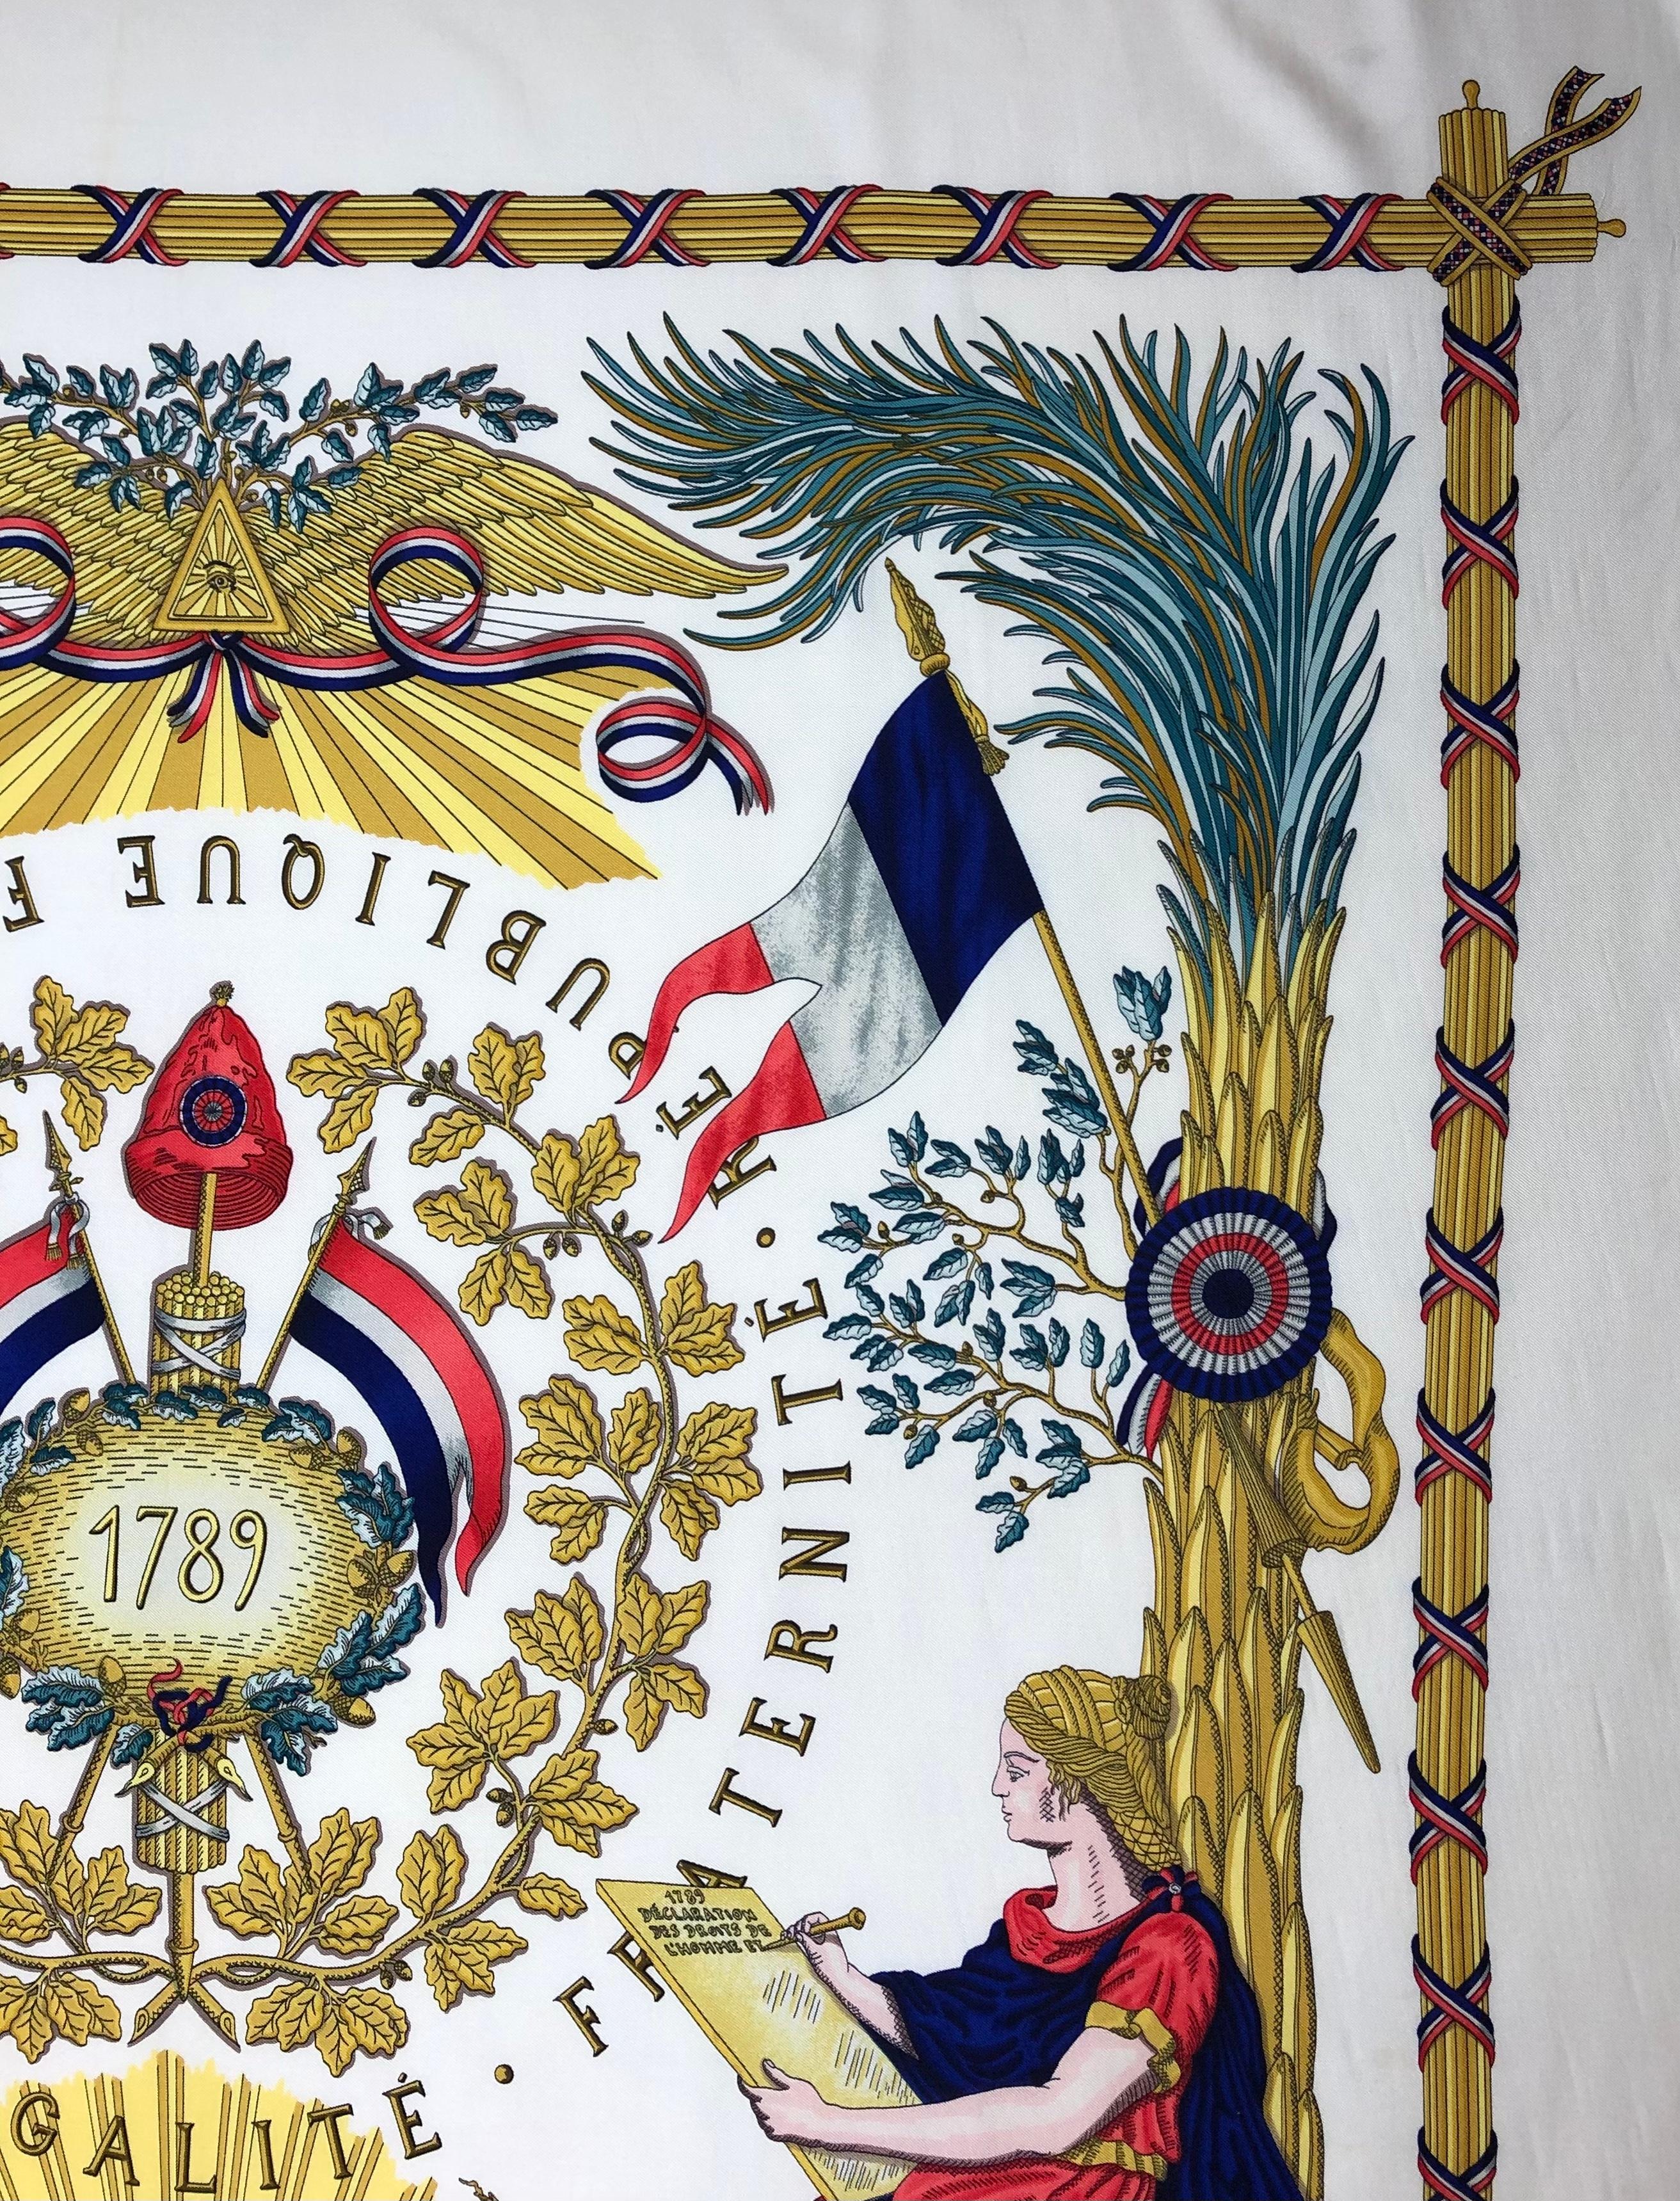 Silk Vintage Hermes Scarf Wall Art Commemorative of the French Revolution, 1789